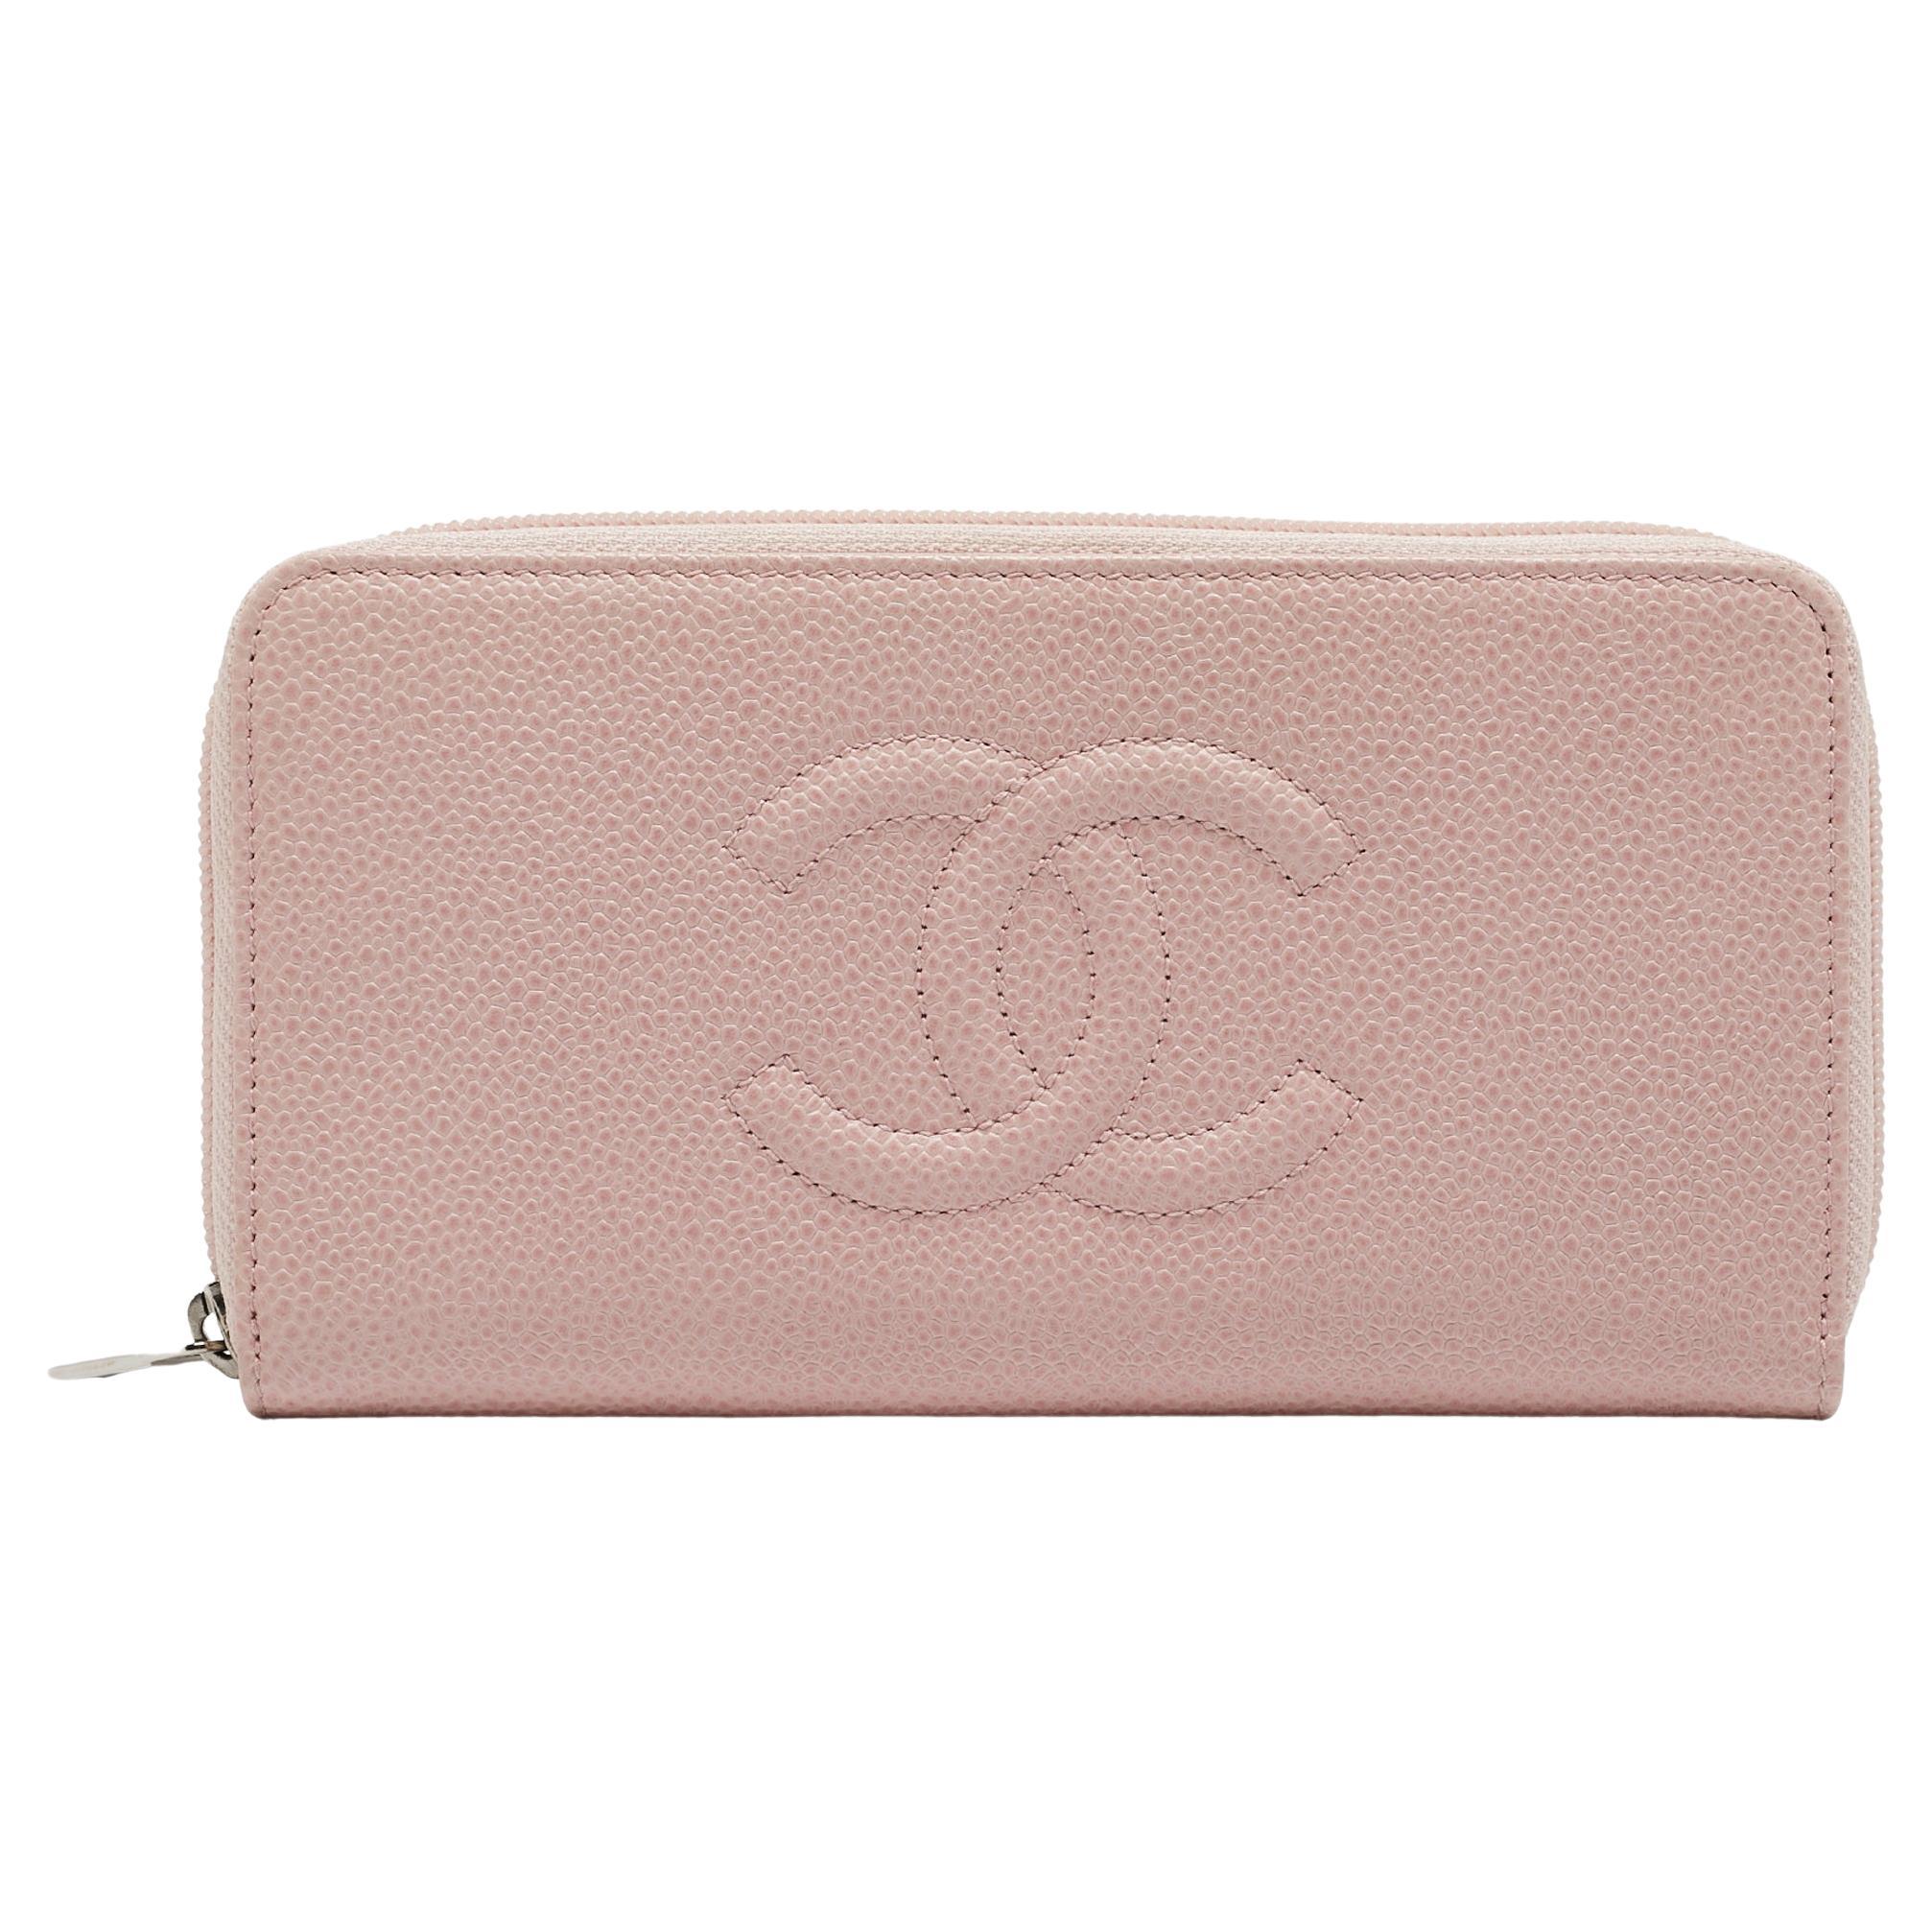 Chanel Pink Caviar Leather CC Zip Around Wallet For Sale